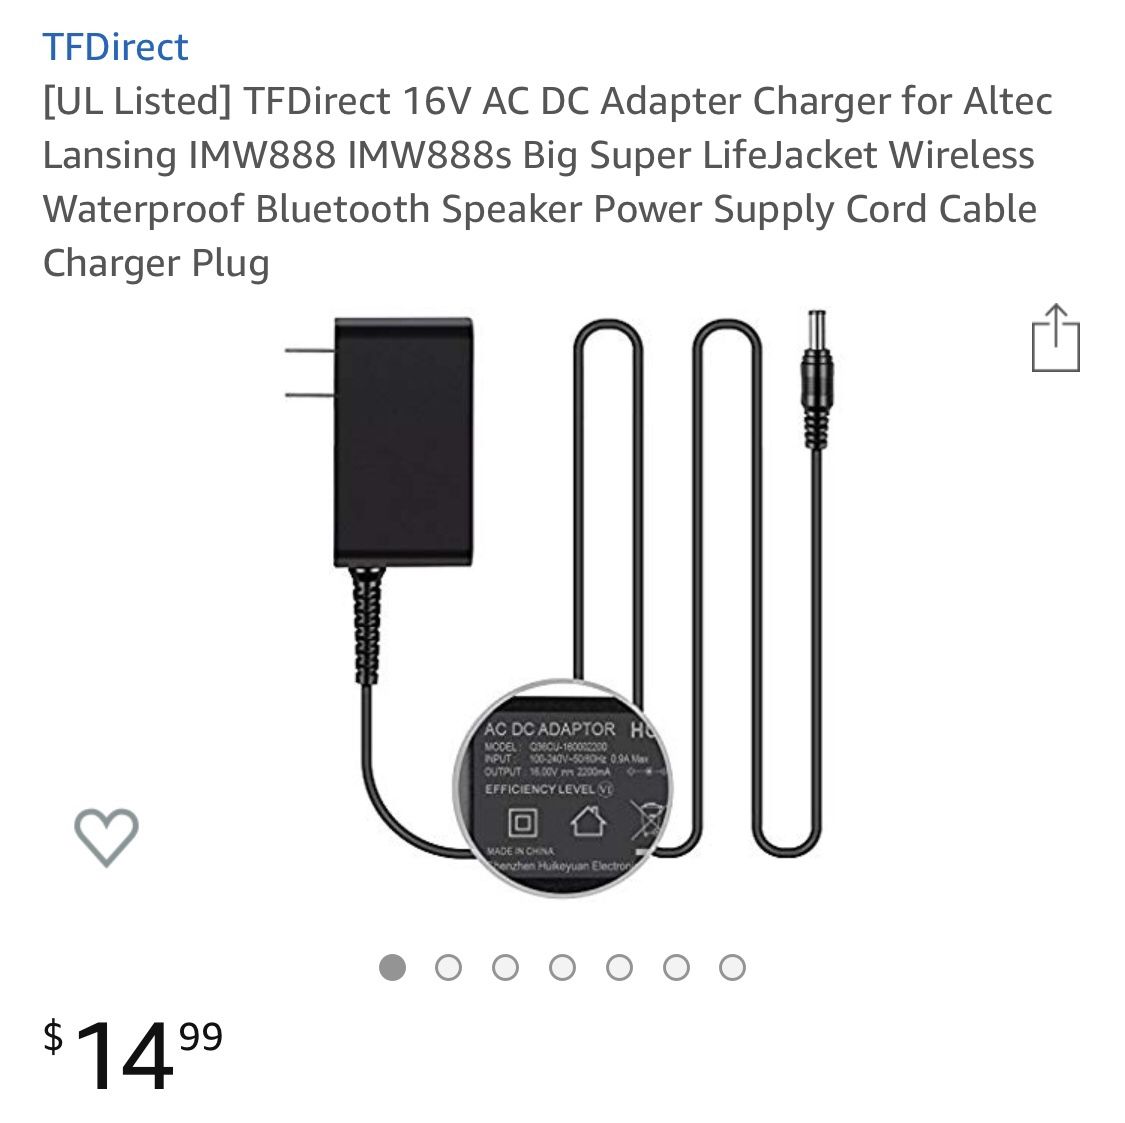 TFDirect [UL Listed] TFDirect 26V AC DC Adapter Charger for Altec Lansing IMW888 IMW888s Big Super LifeJacket Wireless Waterproof Bluetooth Speaker P